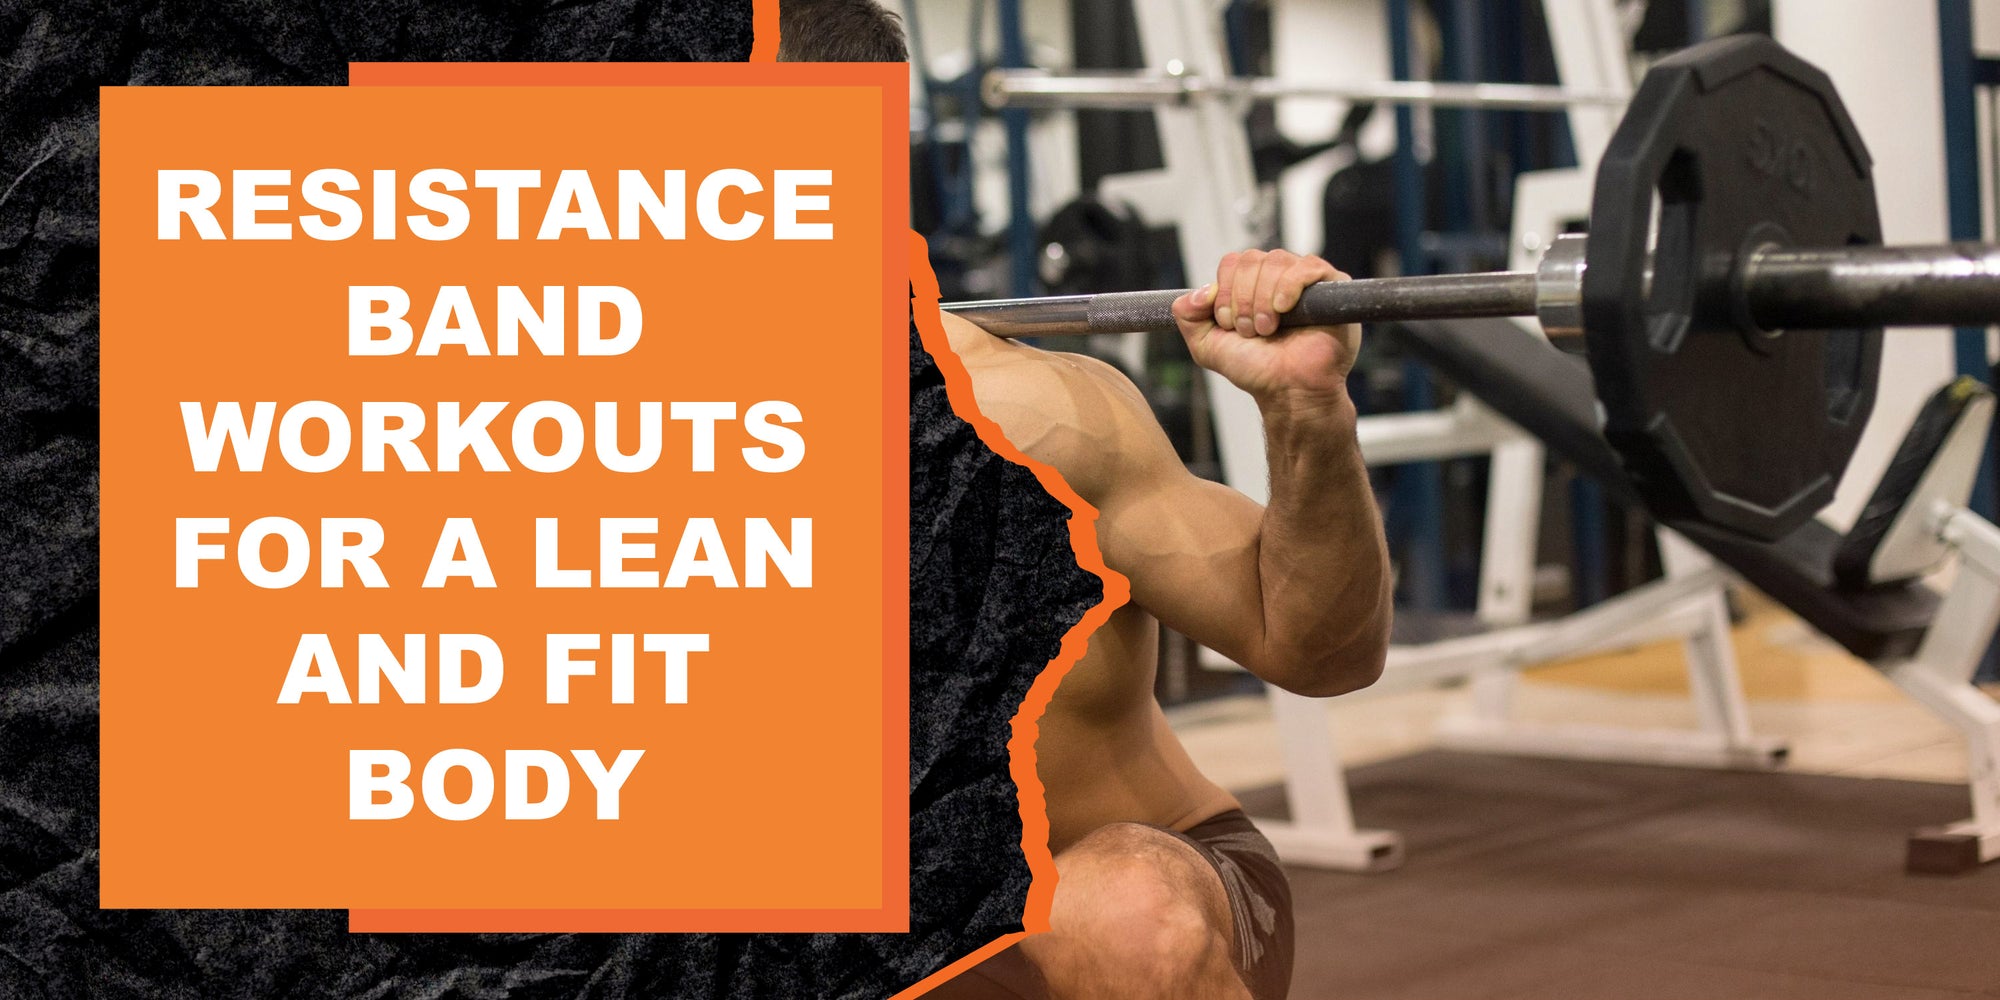 Resistance Band Workouts for a Lean and Fit Body